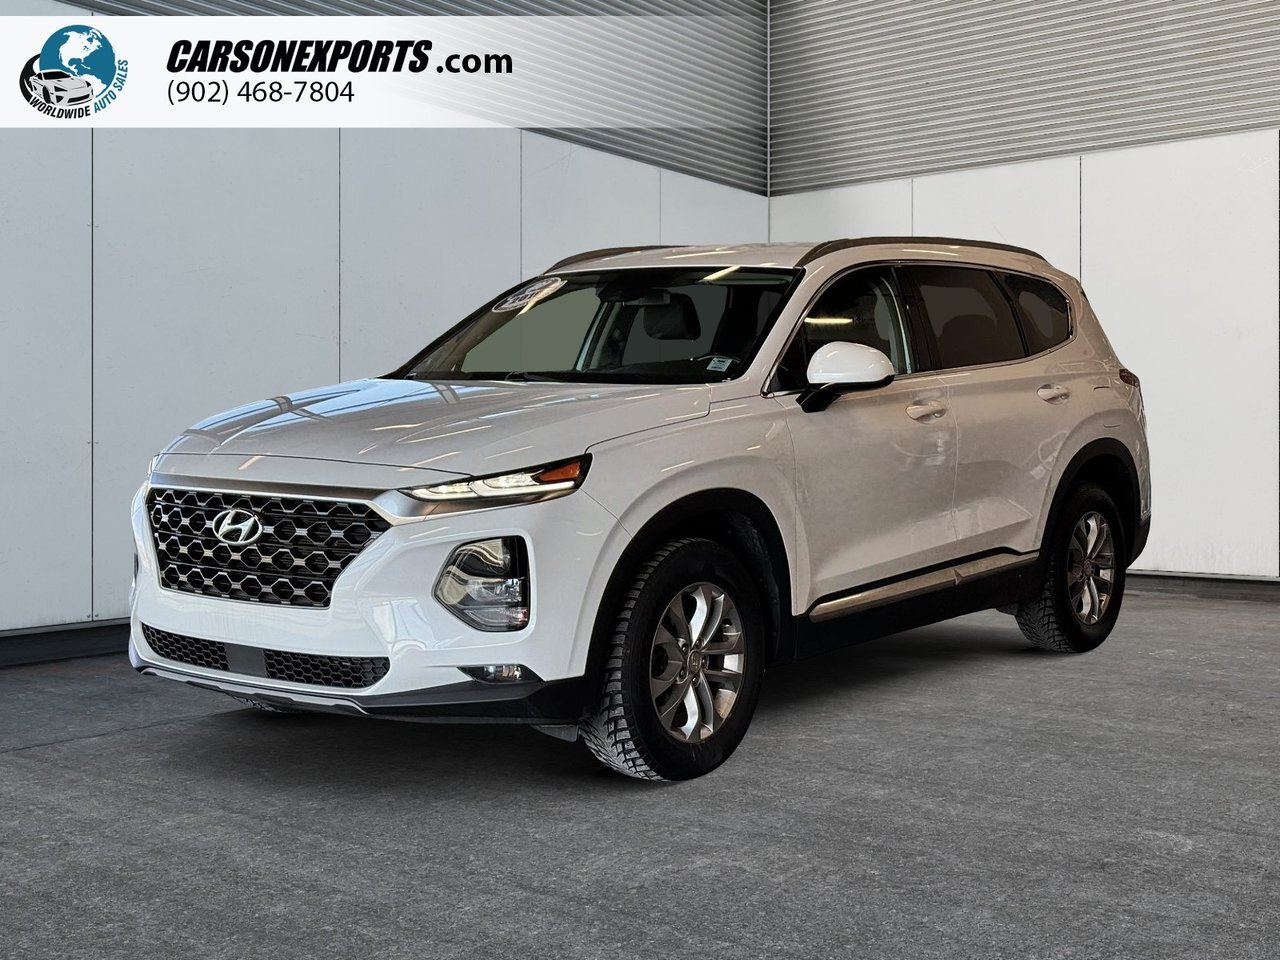 2019 Hyundai Santa Fe Essential The best place to buy a used car. Period